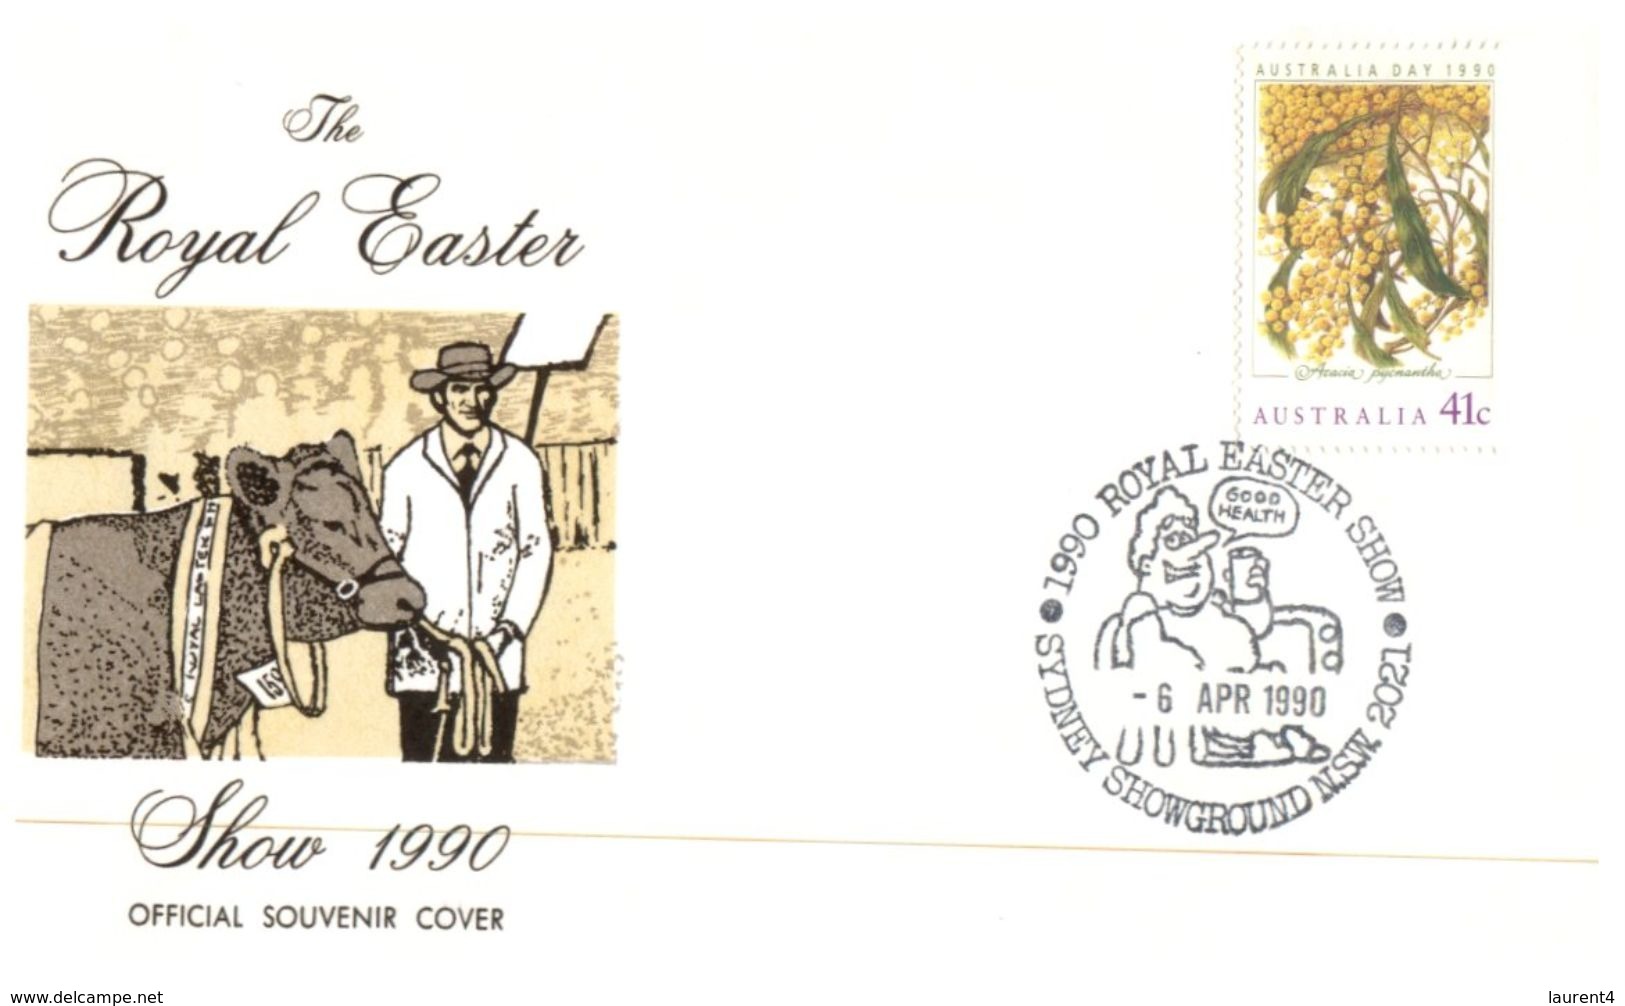 (666) Australia FDC Cover - 1990 - Royal Easter Show (2 Covers) - Premiers Jours (FDC)